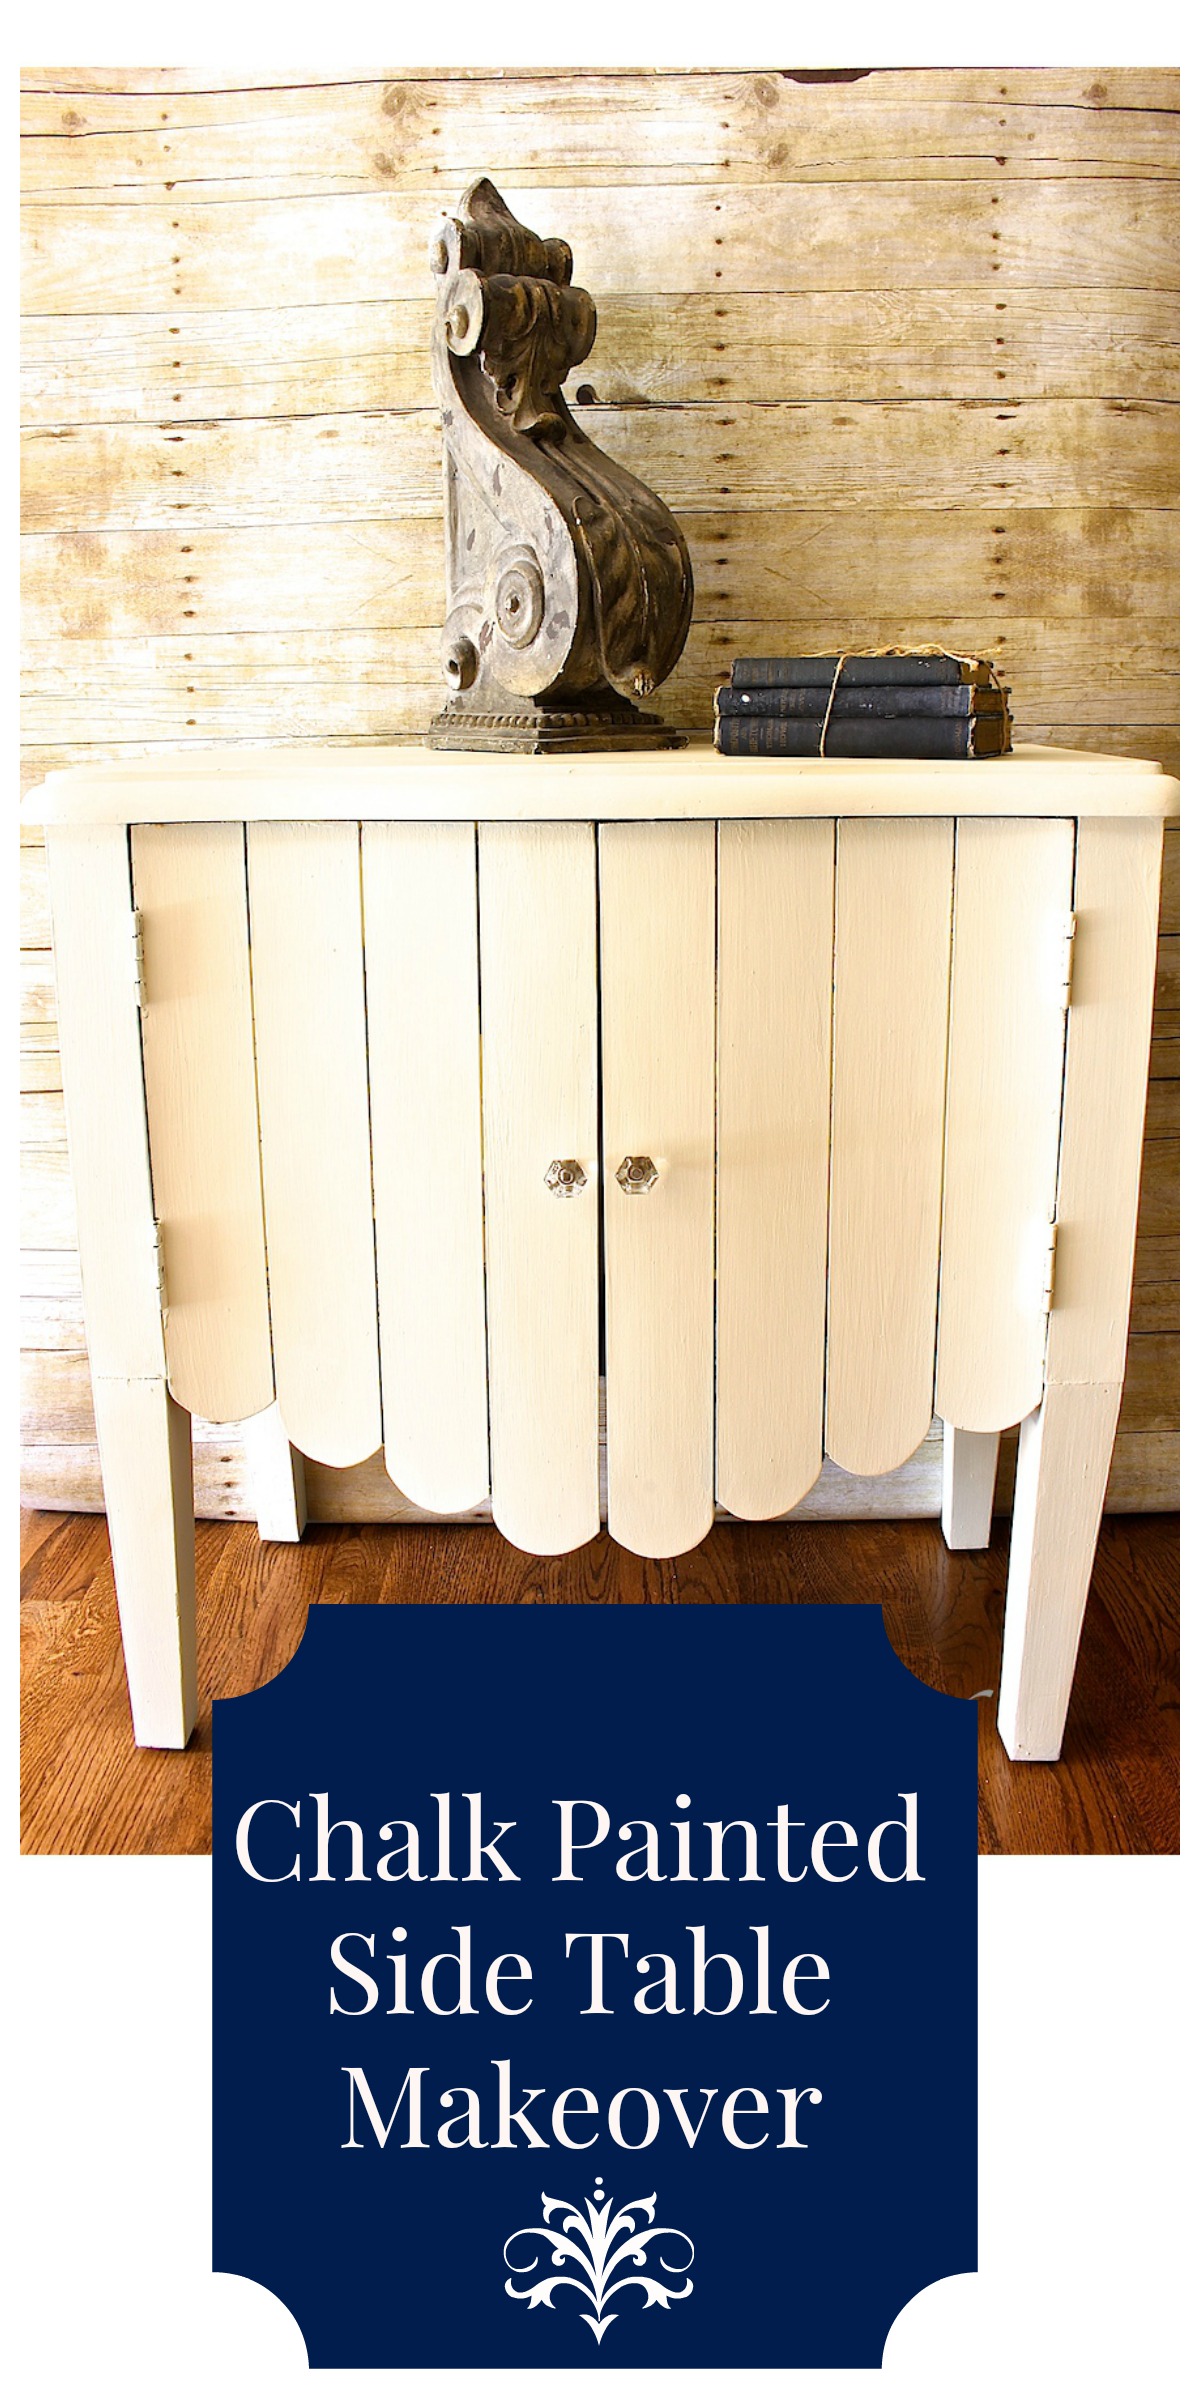 Side table makeover with Annie Sloan Chalk Paint - inside painted in Napoleonic Blue Annie Sloan Chalk Paint. Outside of table painted in Annie Sloan Chalk Paint Old White